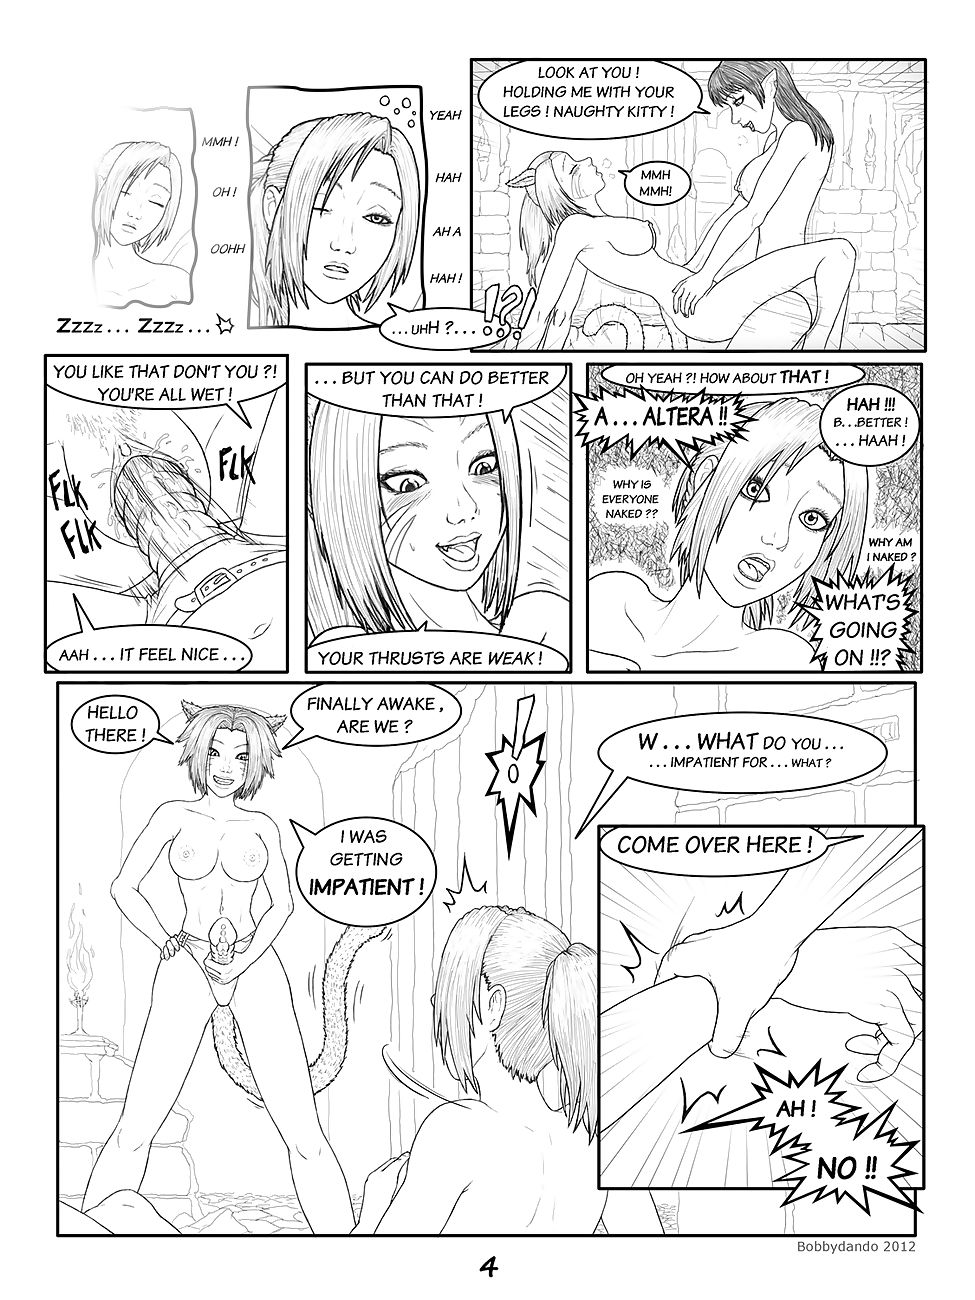 The Naughty Levequest page 1